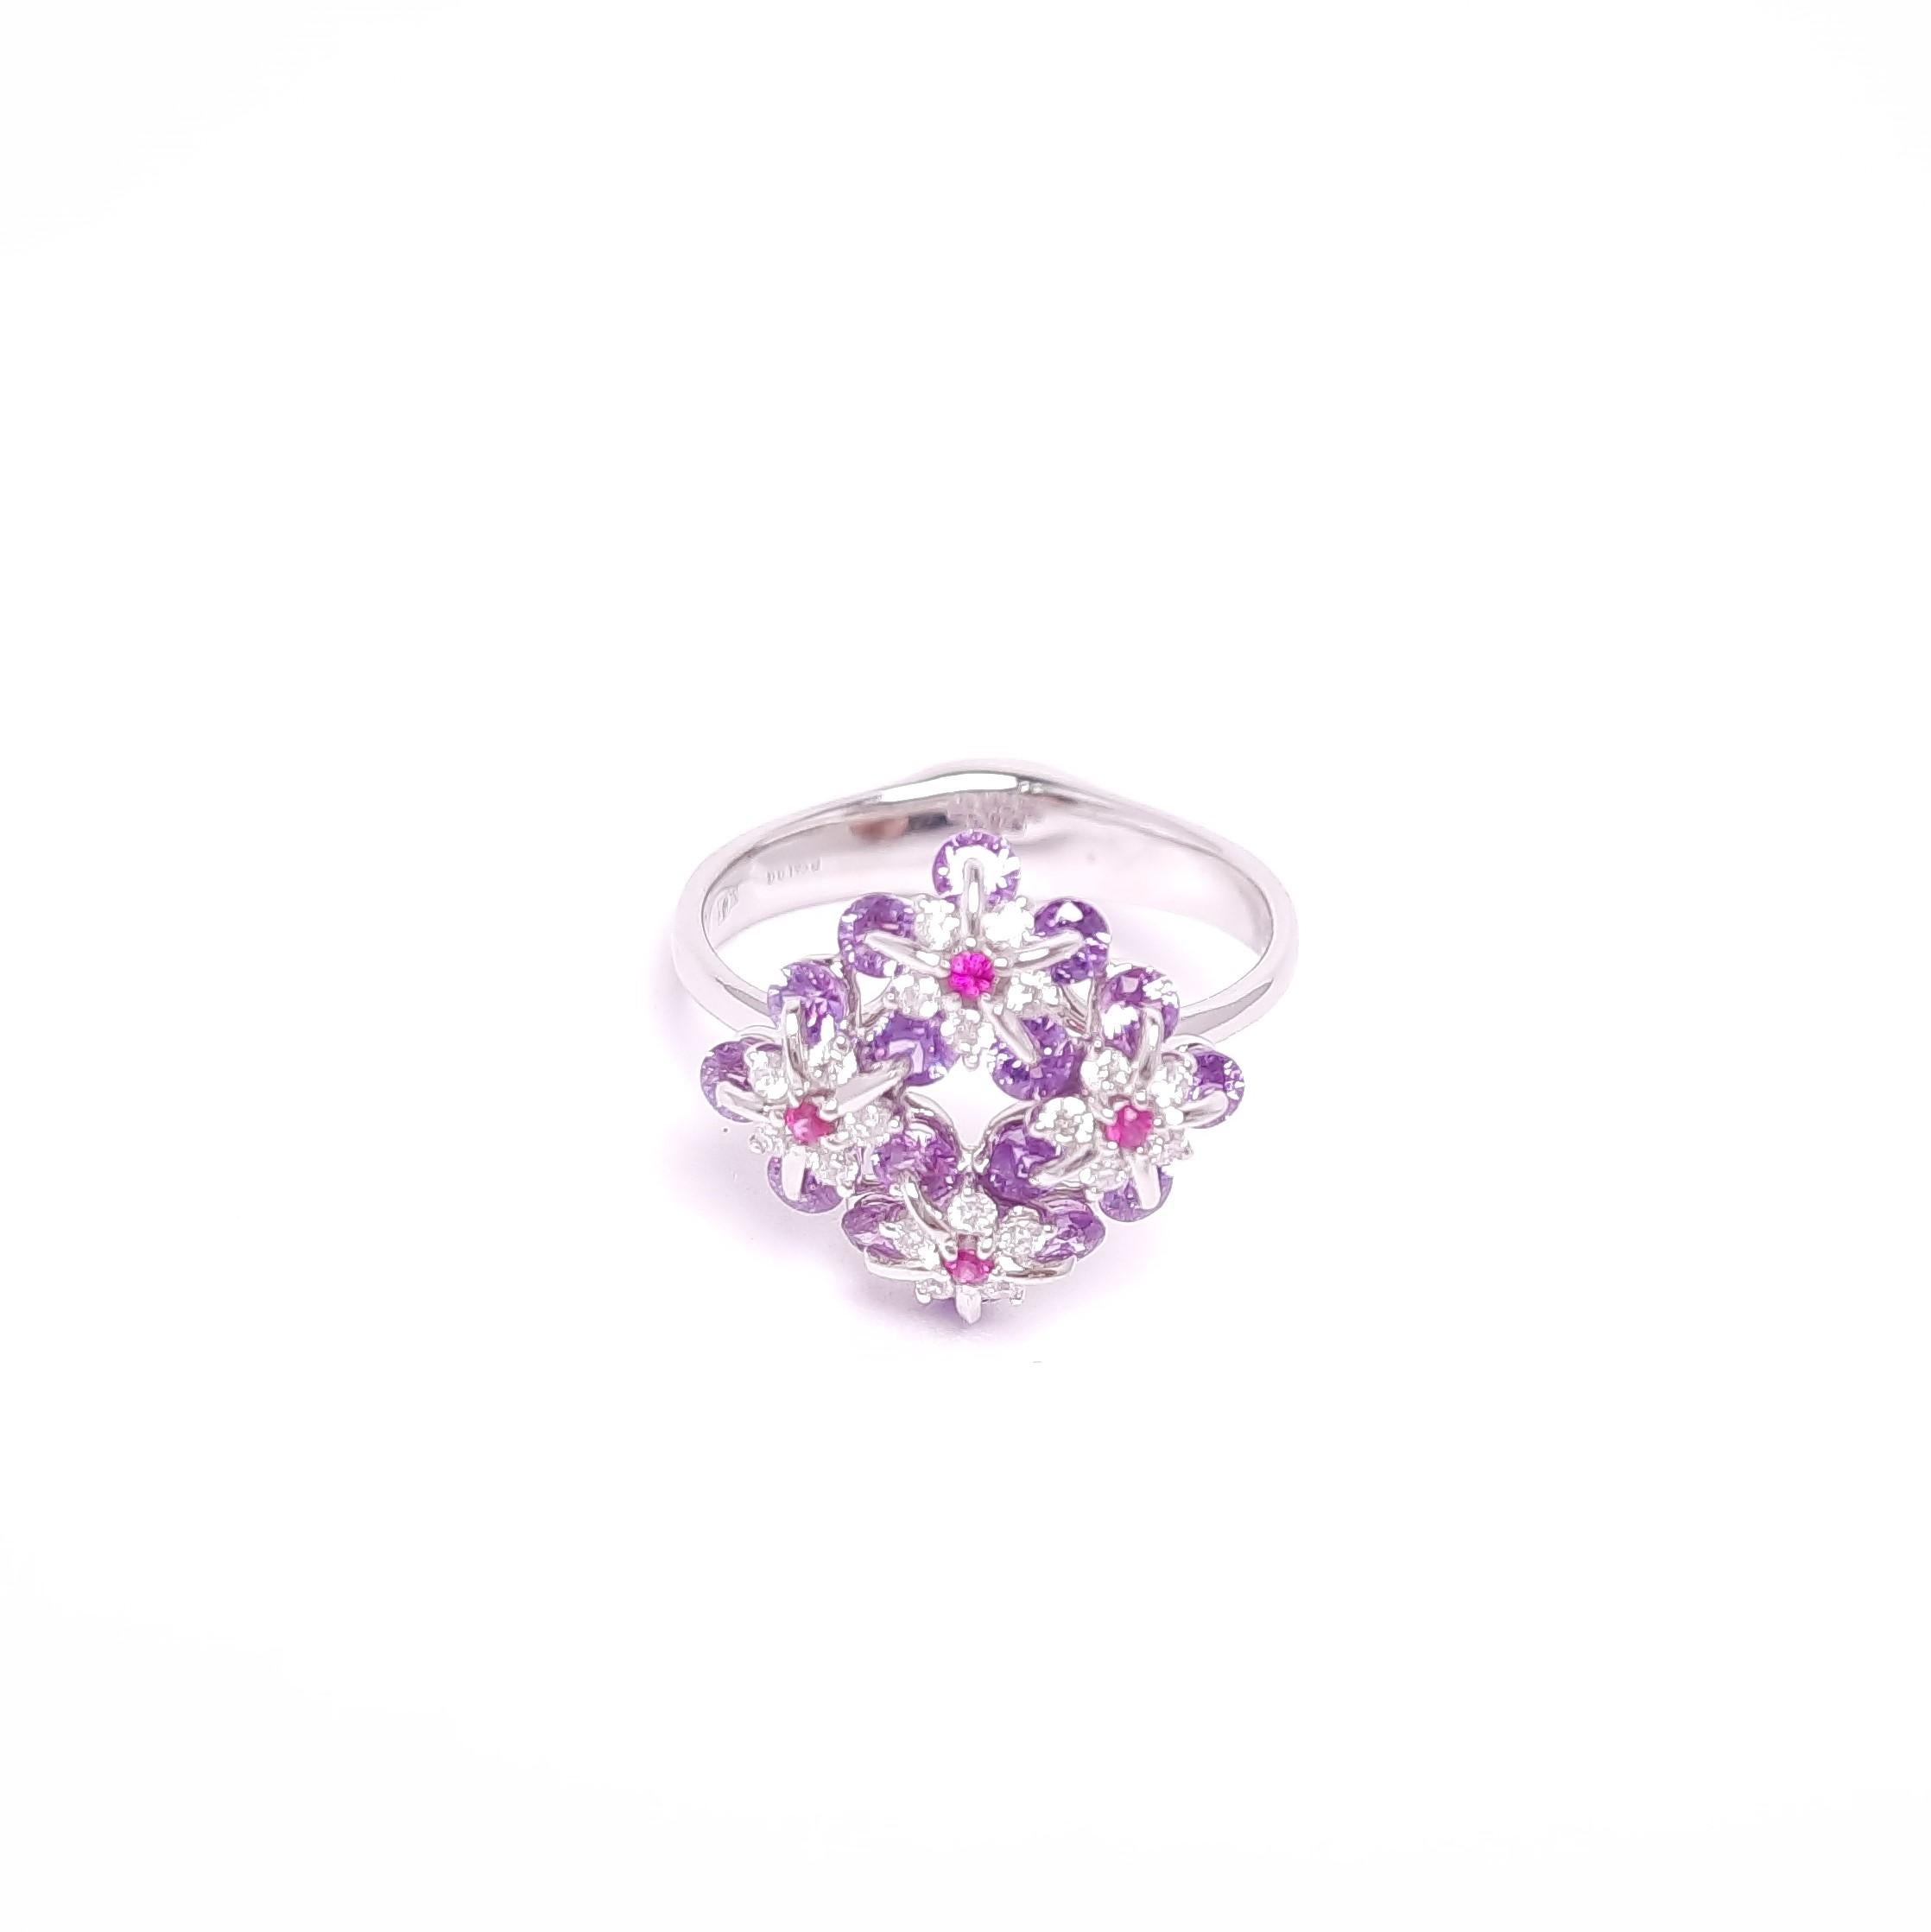 Symbol of remembrance and eternal love, Forget Me Not flower has become an everlasting flower made in 18karat white gold, diamonds and fancy sapphires. Mounted in Waltzing Brilliance technology, this lively ring will be a precious remembrance of